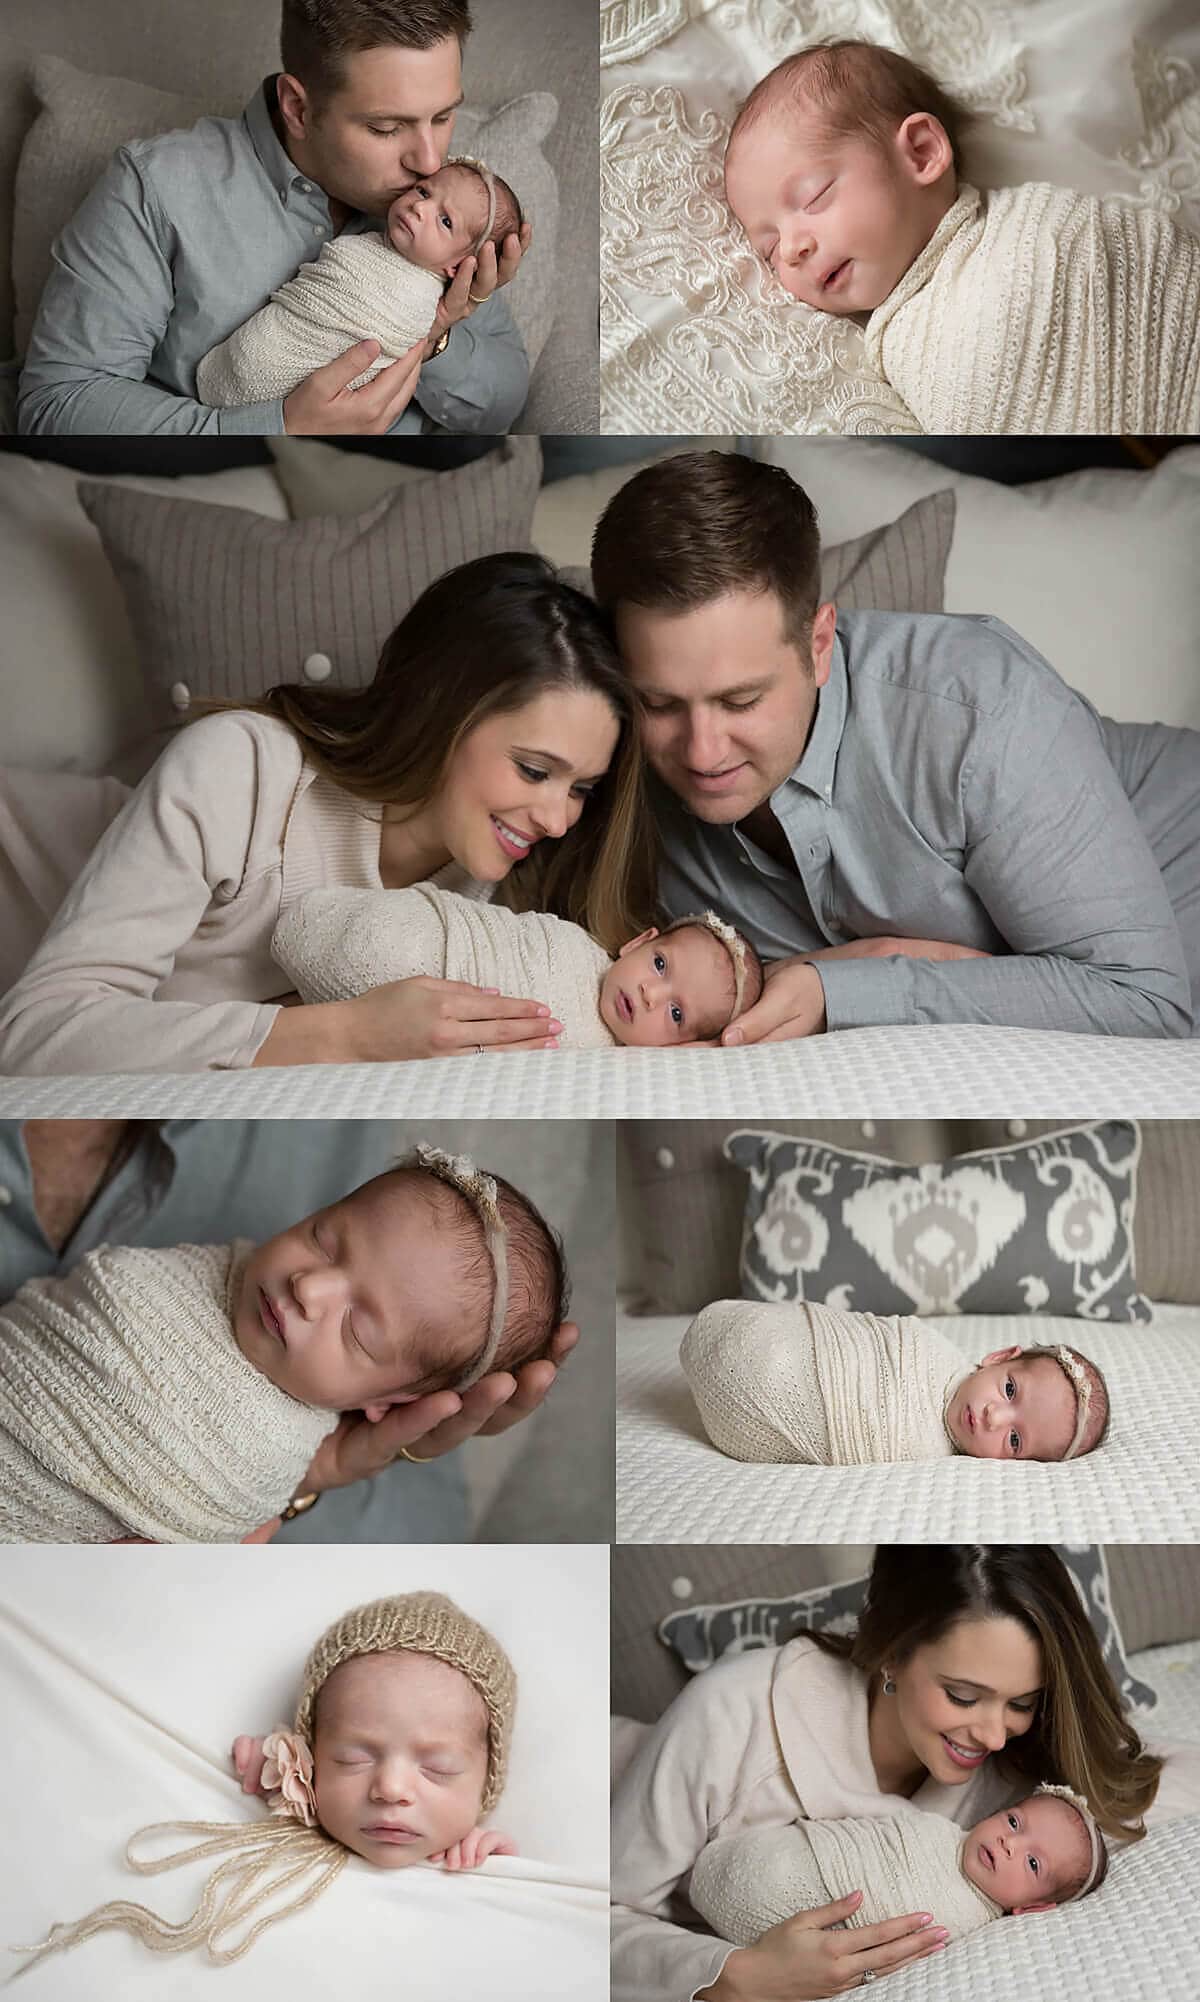 A collage of photos of a family with their newborn baby.